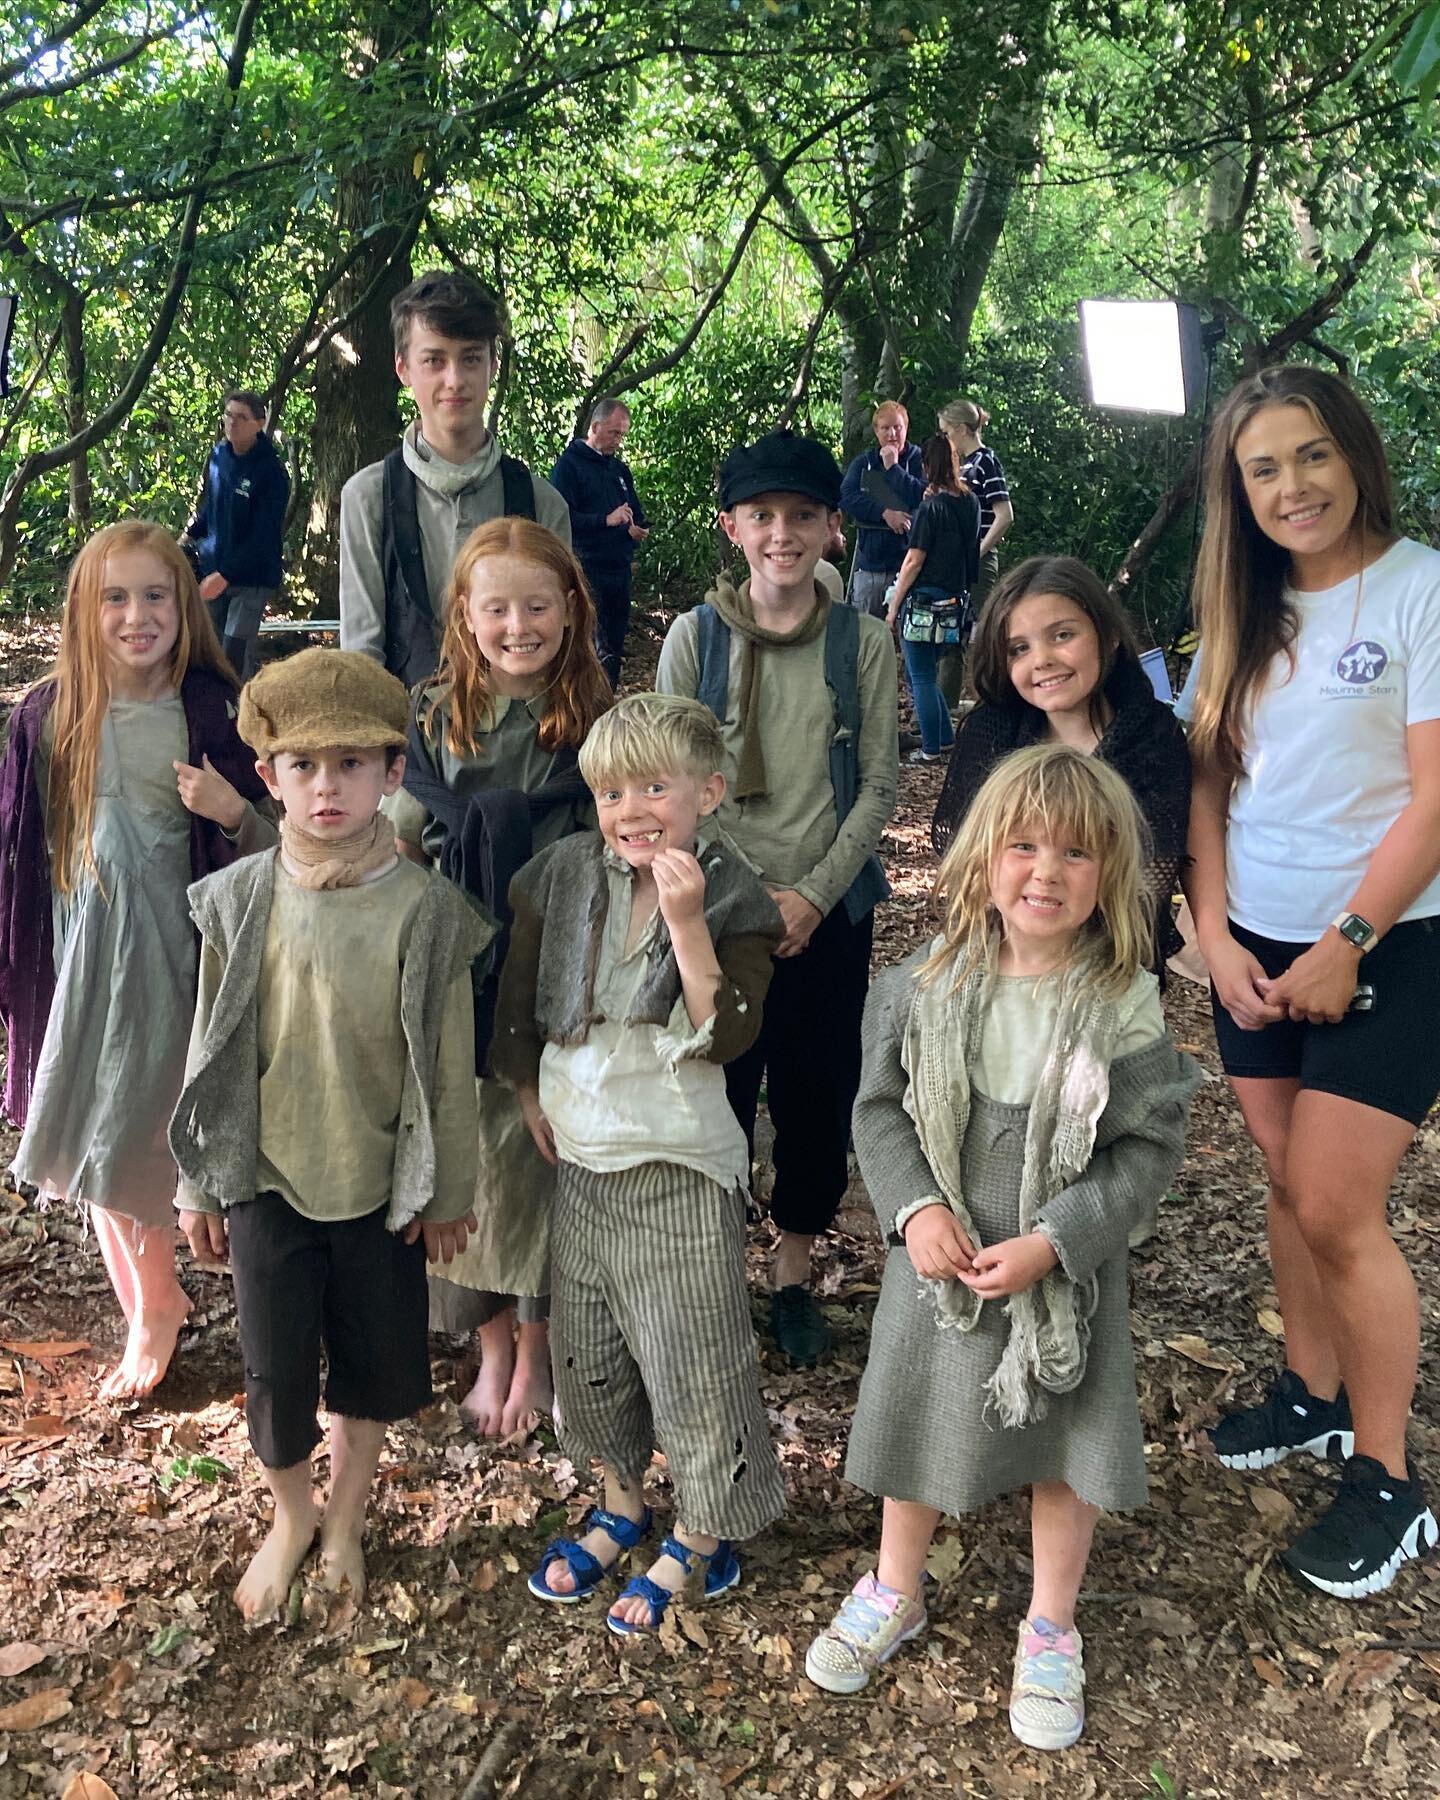 This time last year! This was the beginning of our casting agent journey. Some of our fab wee stars got to take part in a film and one year on more opportunities are on the horizon! Watch this space for more information on &lsquo;Clare&rsquo;s Star T